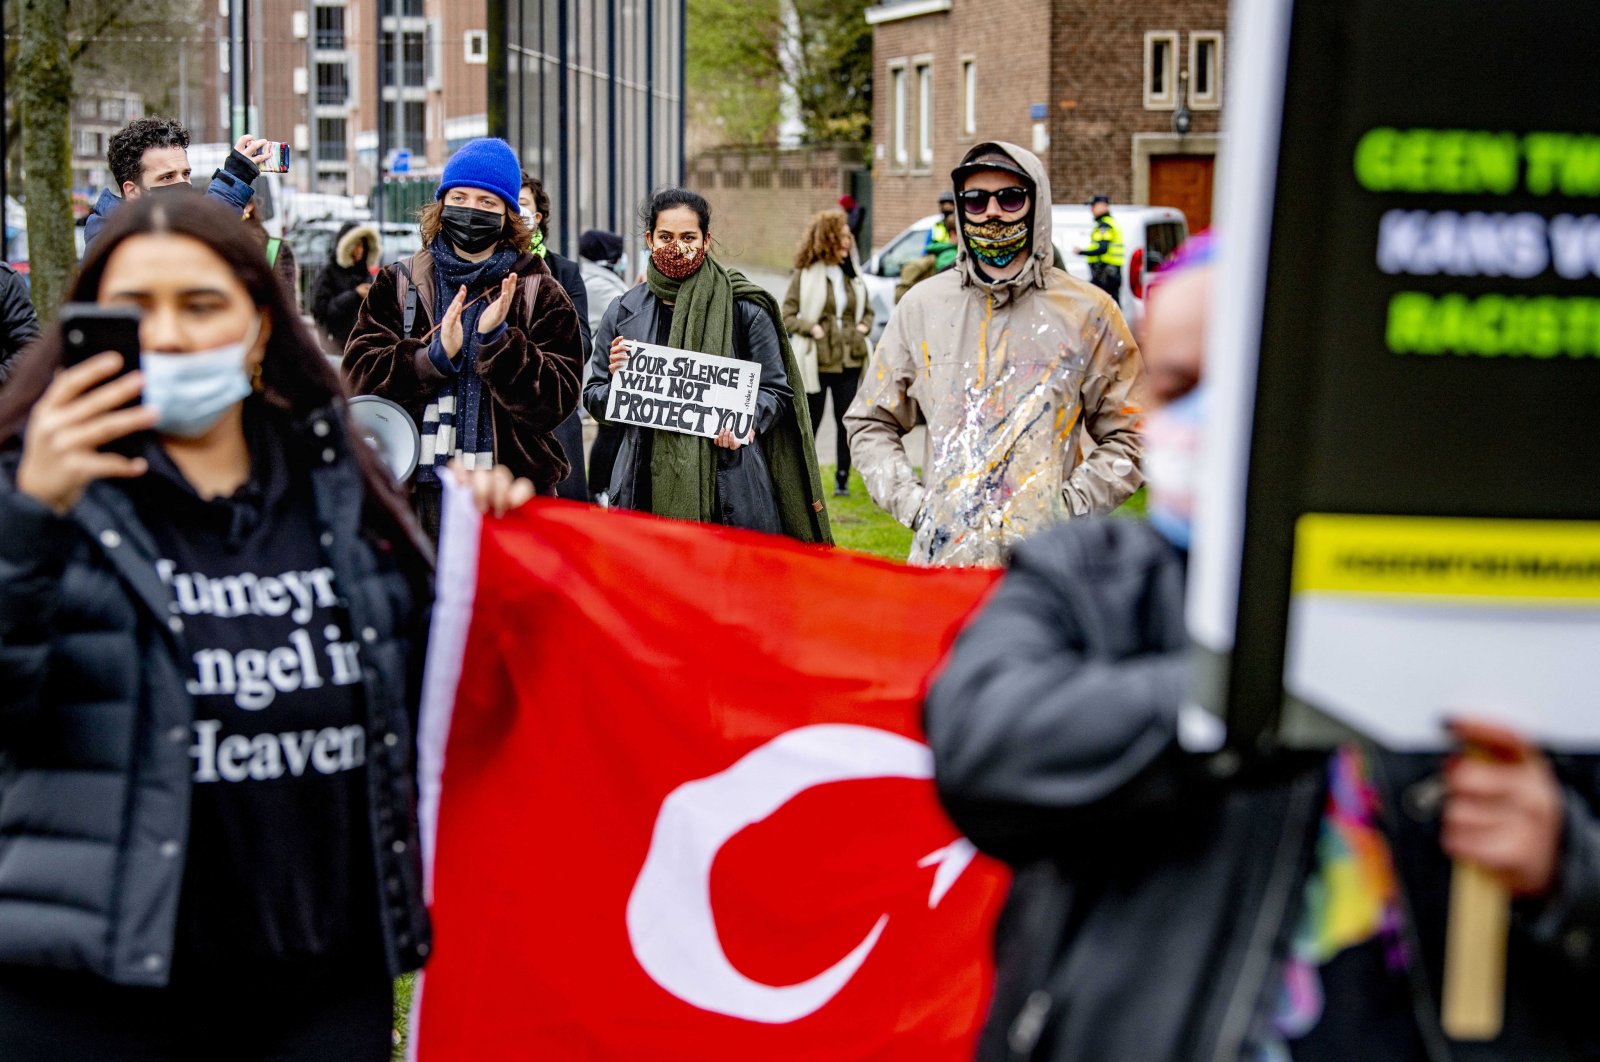 Demonstrators stage a protest against racism at a police station as they demand the dismissal of five police officers who expressed racist stances against immigrants in a WhatsApp group, in Rotterdam, Netherlands, March 28, 2021. (Reuters Photo)